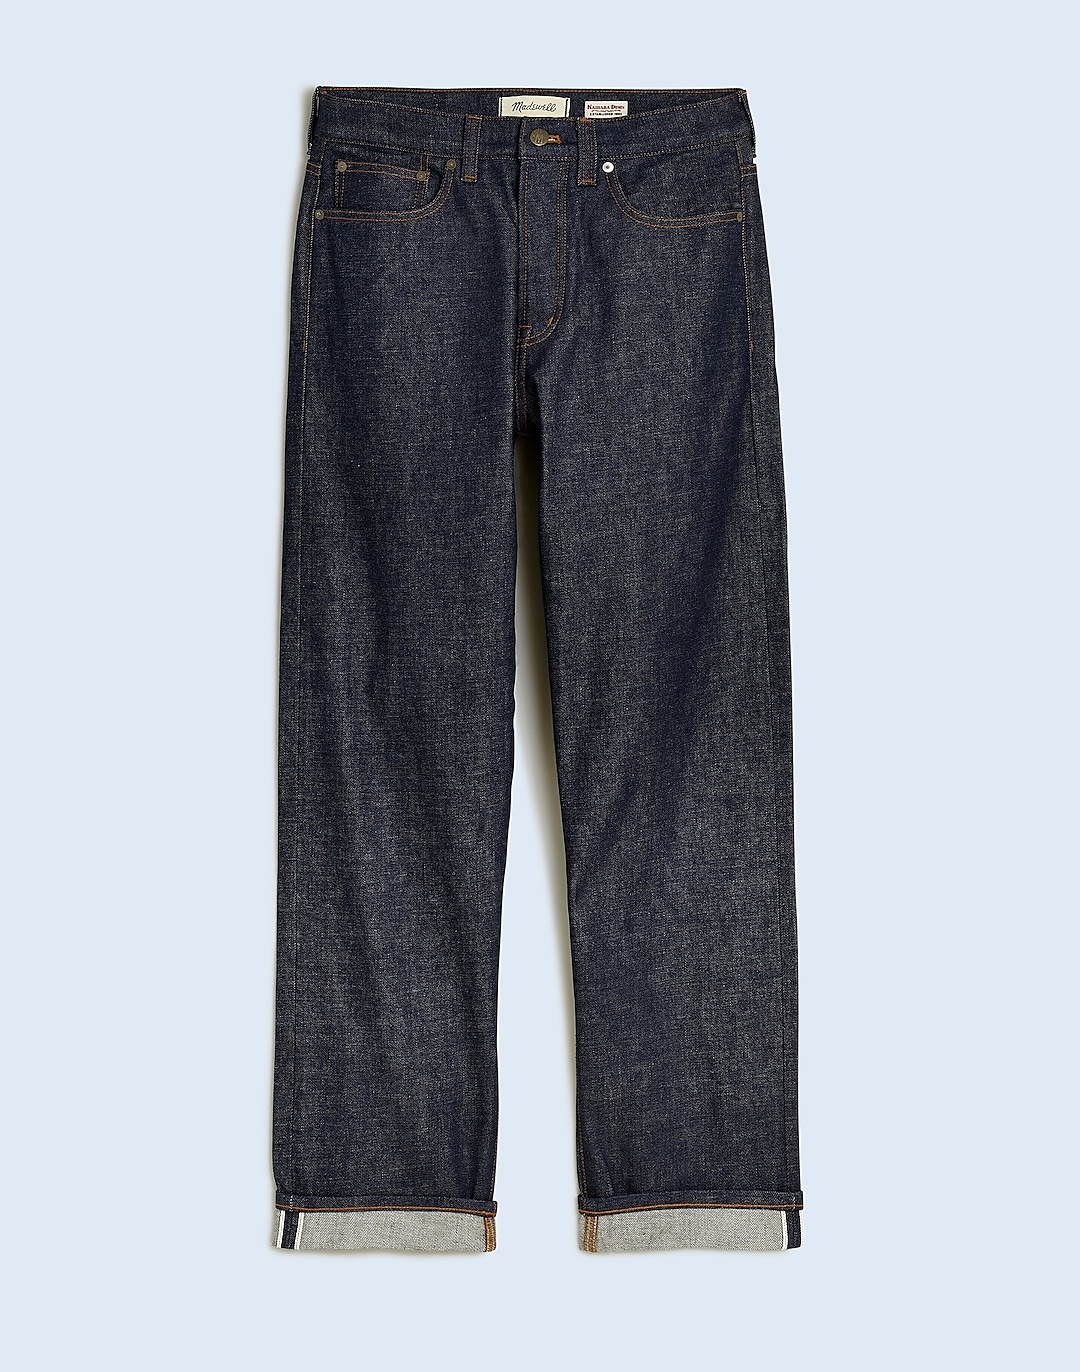 Vintage Relaxed Straight Jeans in Raw Selvedge | Madewell